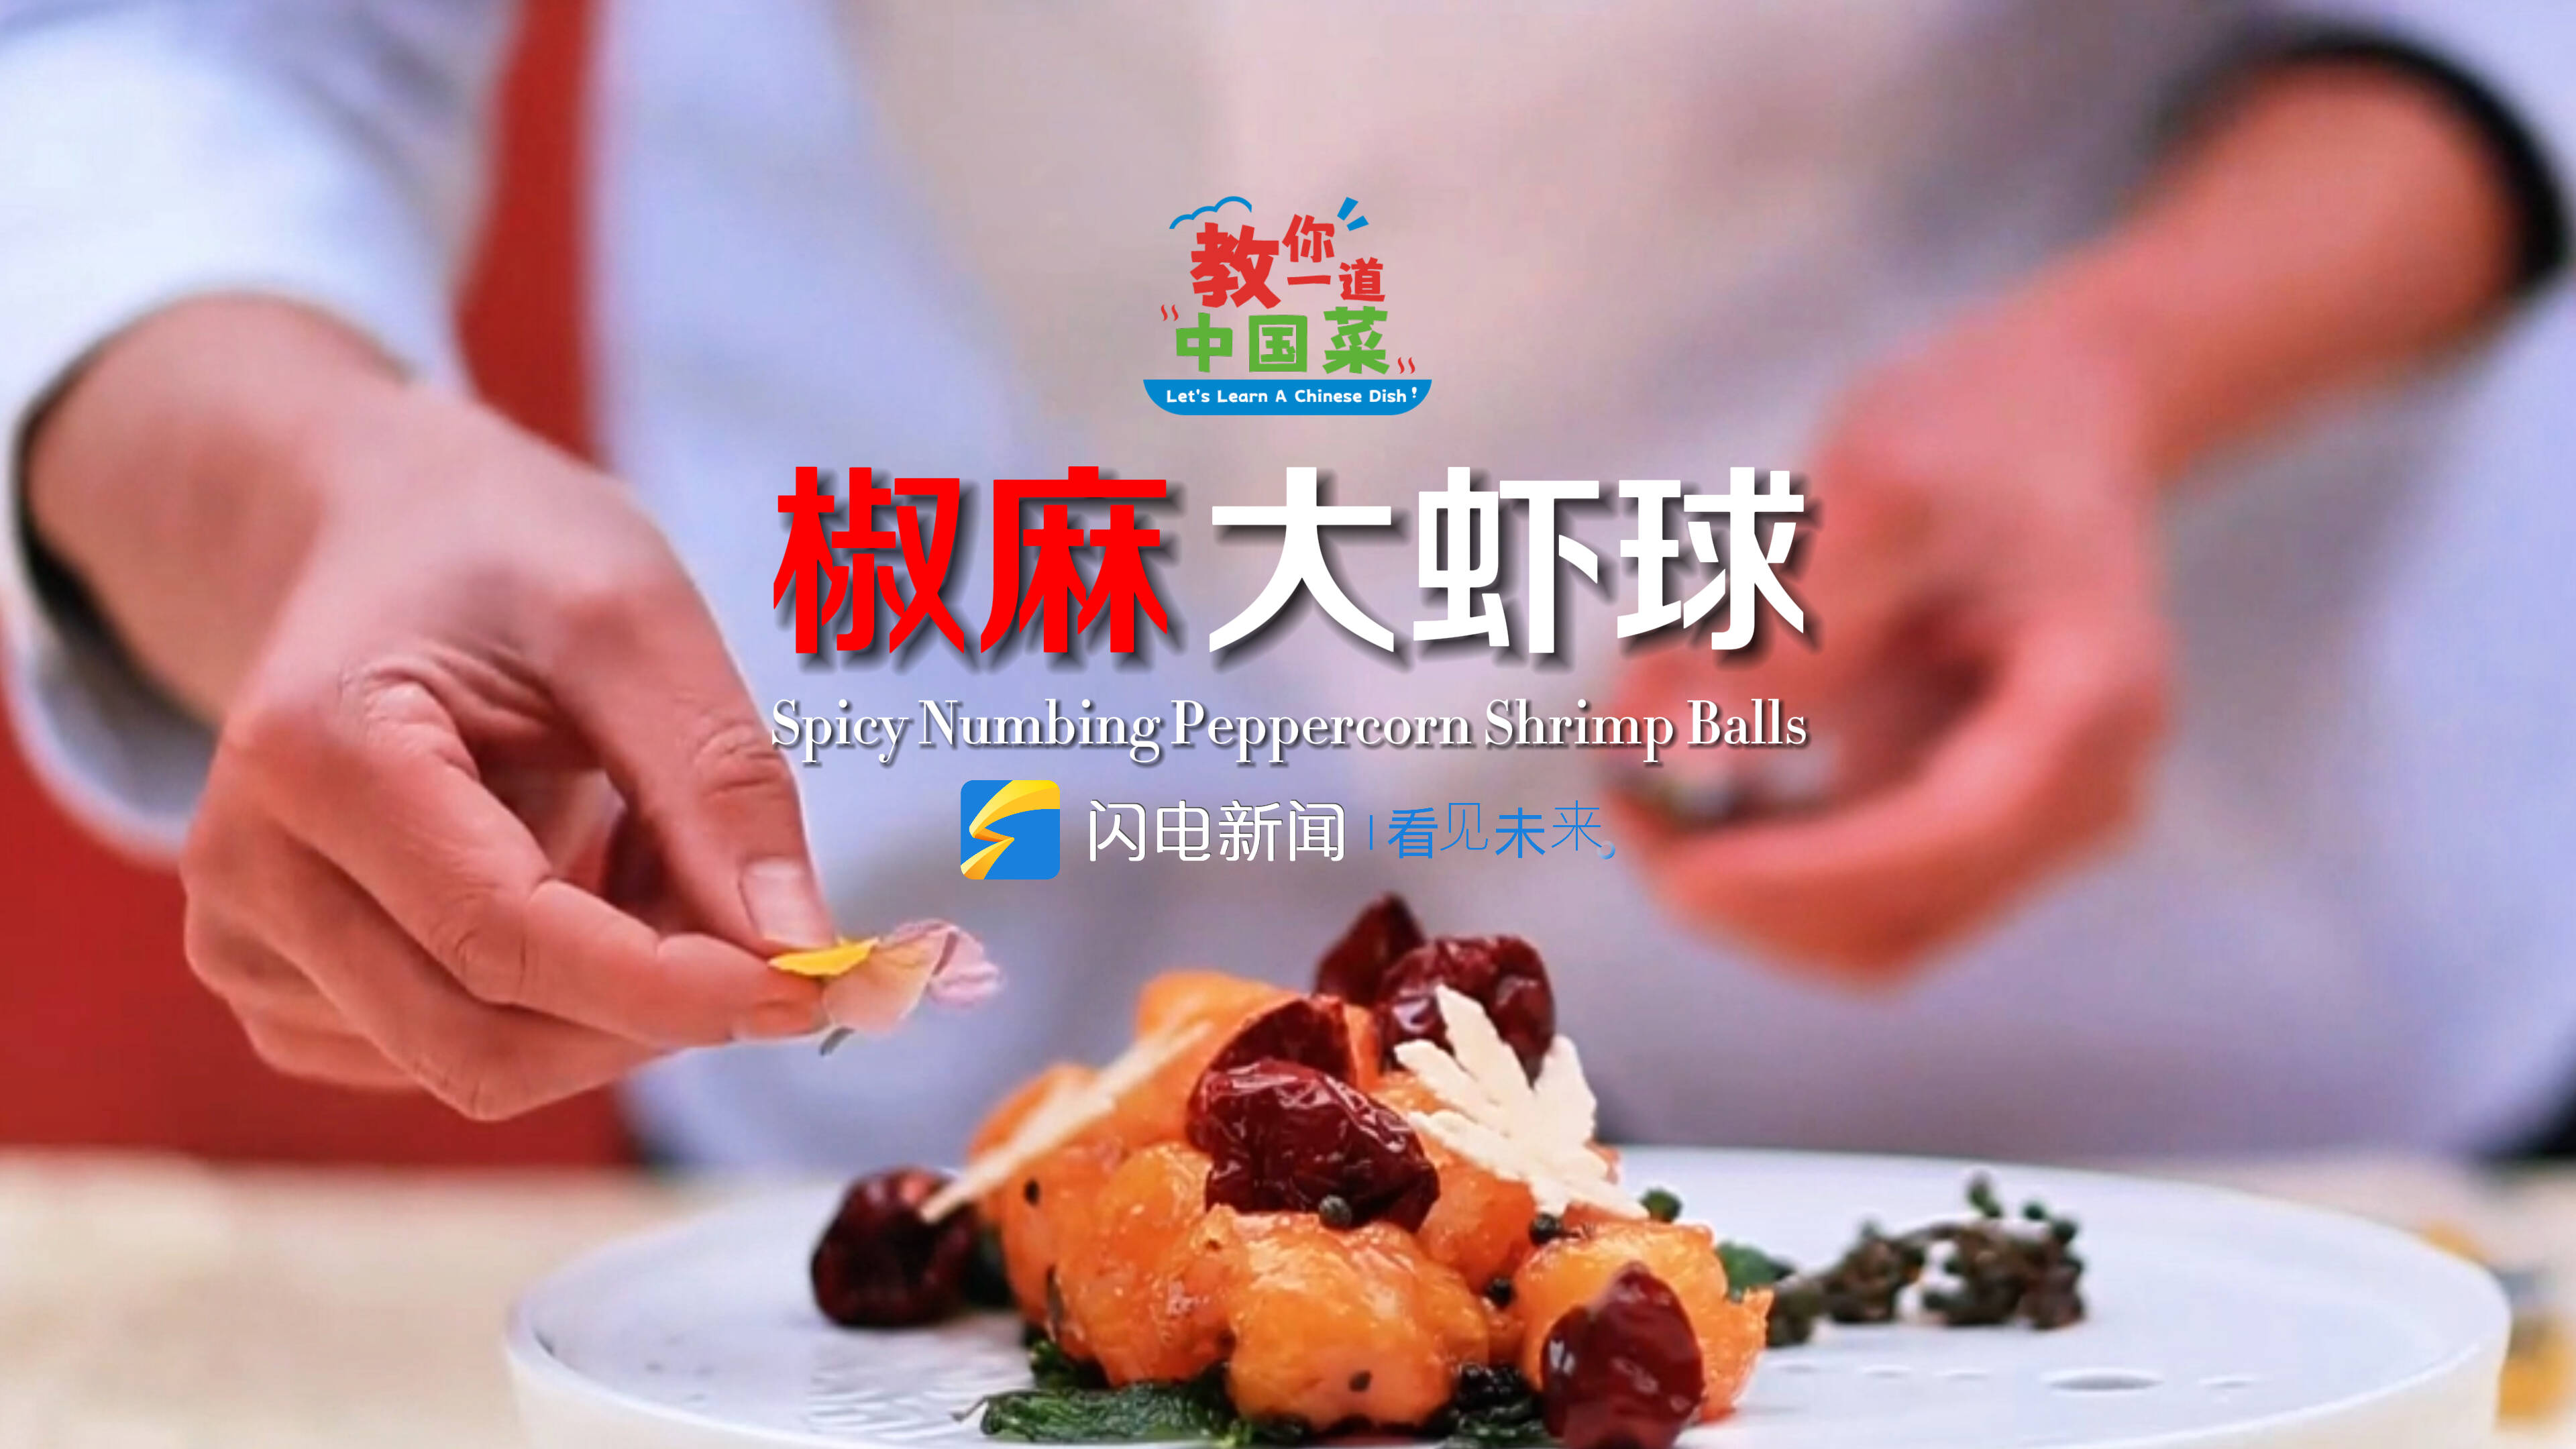 Let's learn a Chinese dish丨Spicy Numbing Peppercorn Shrimp Balls